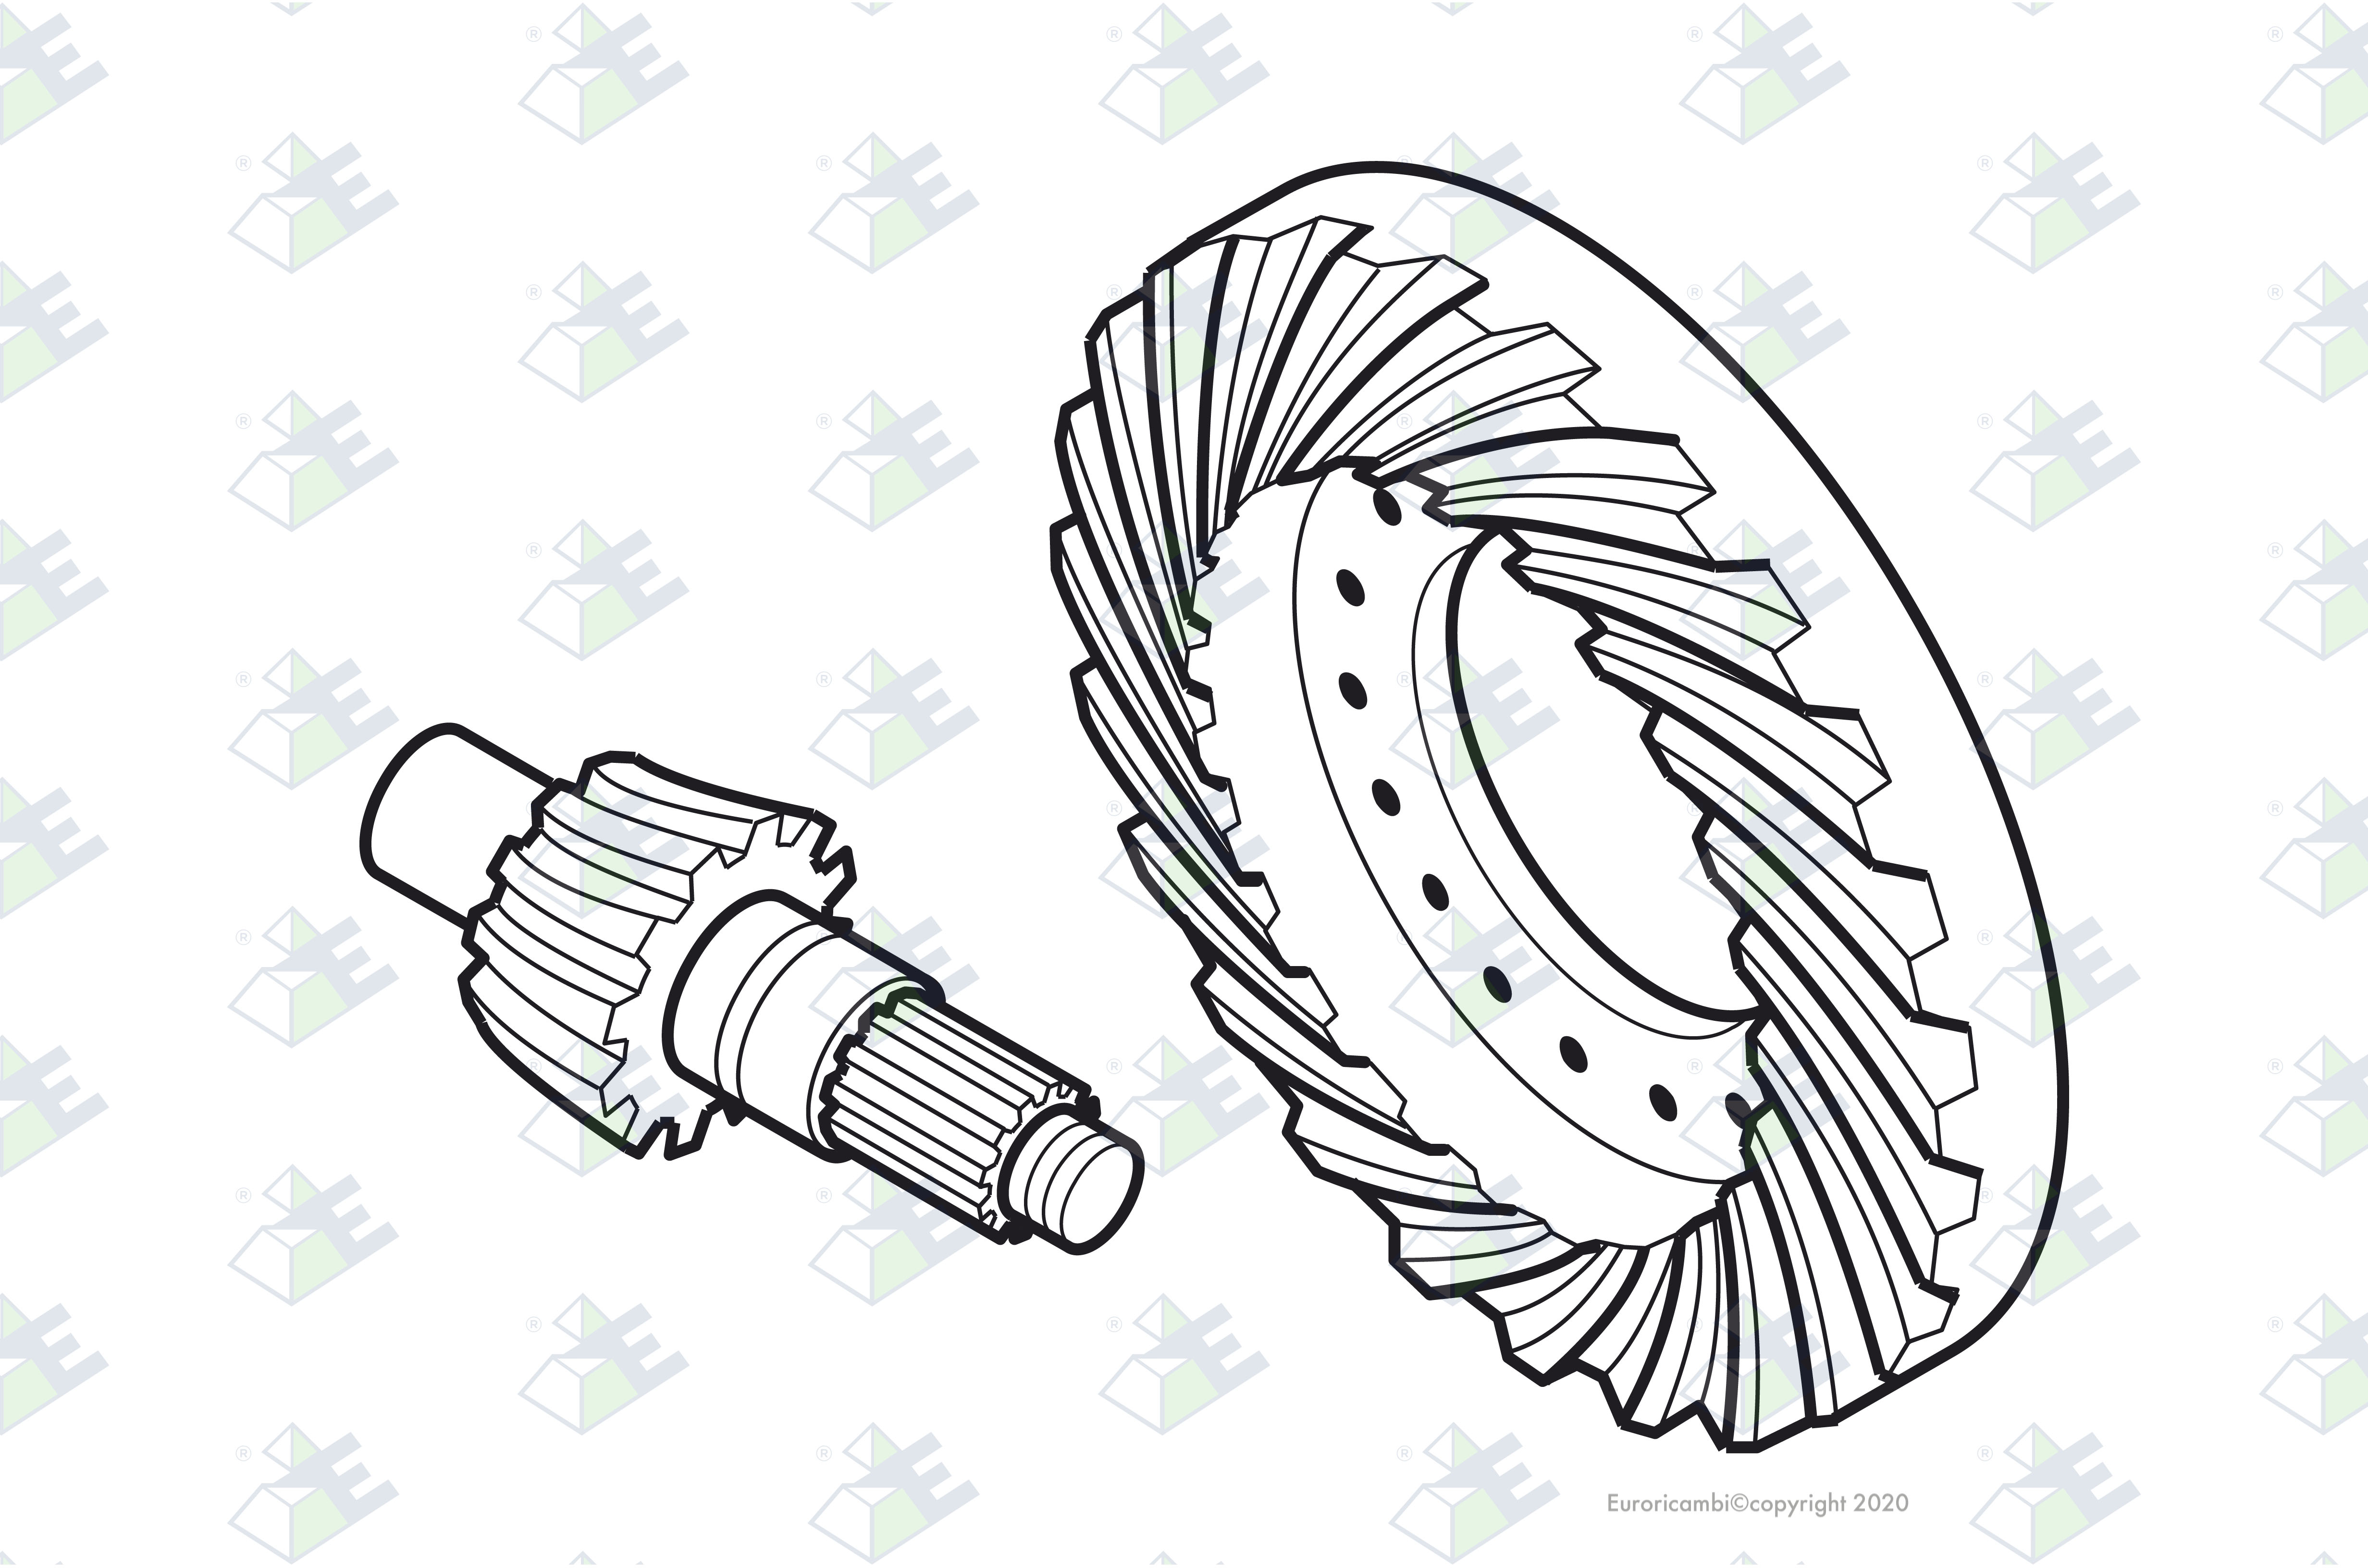 CROWN WHEEL/PINION 39:7 suitable to AM GEARS 66957